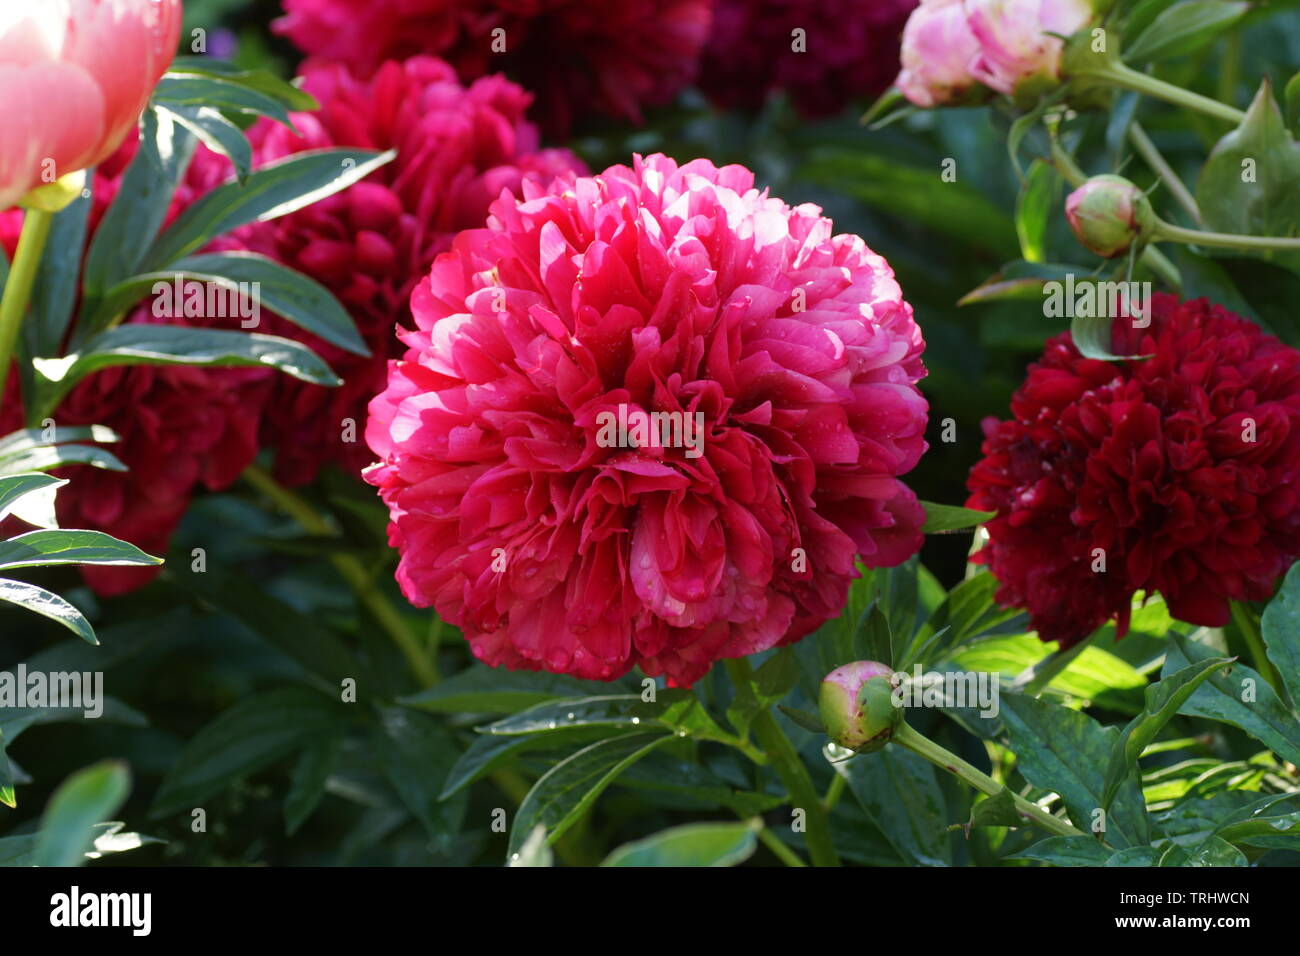 Paeonia Red Grace. Double red peony flower. Paeonia lactiflora (Chinese peony or common garden peony). Stock Photo